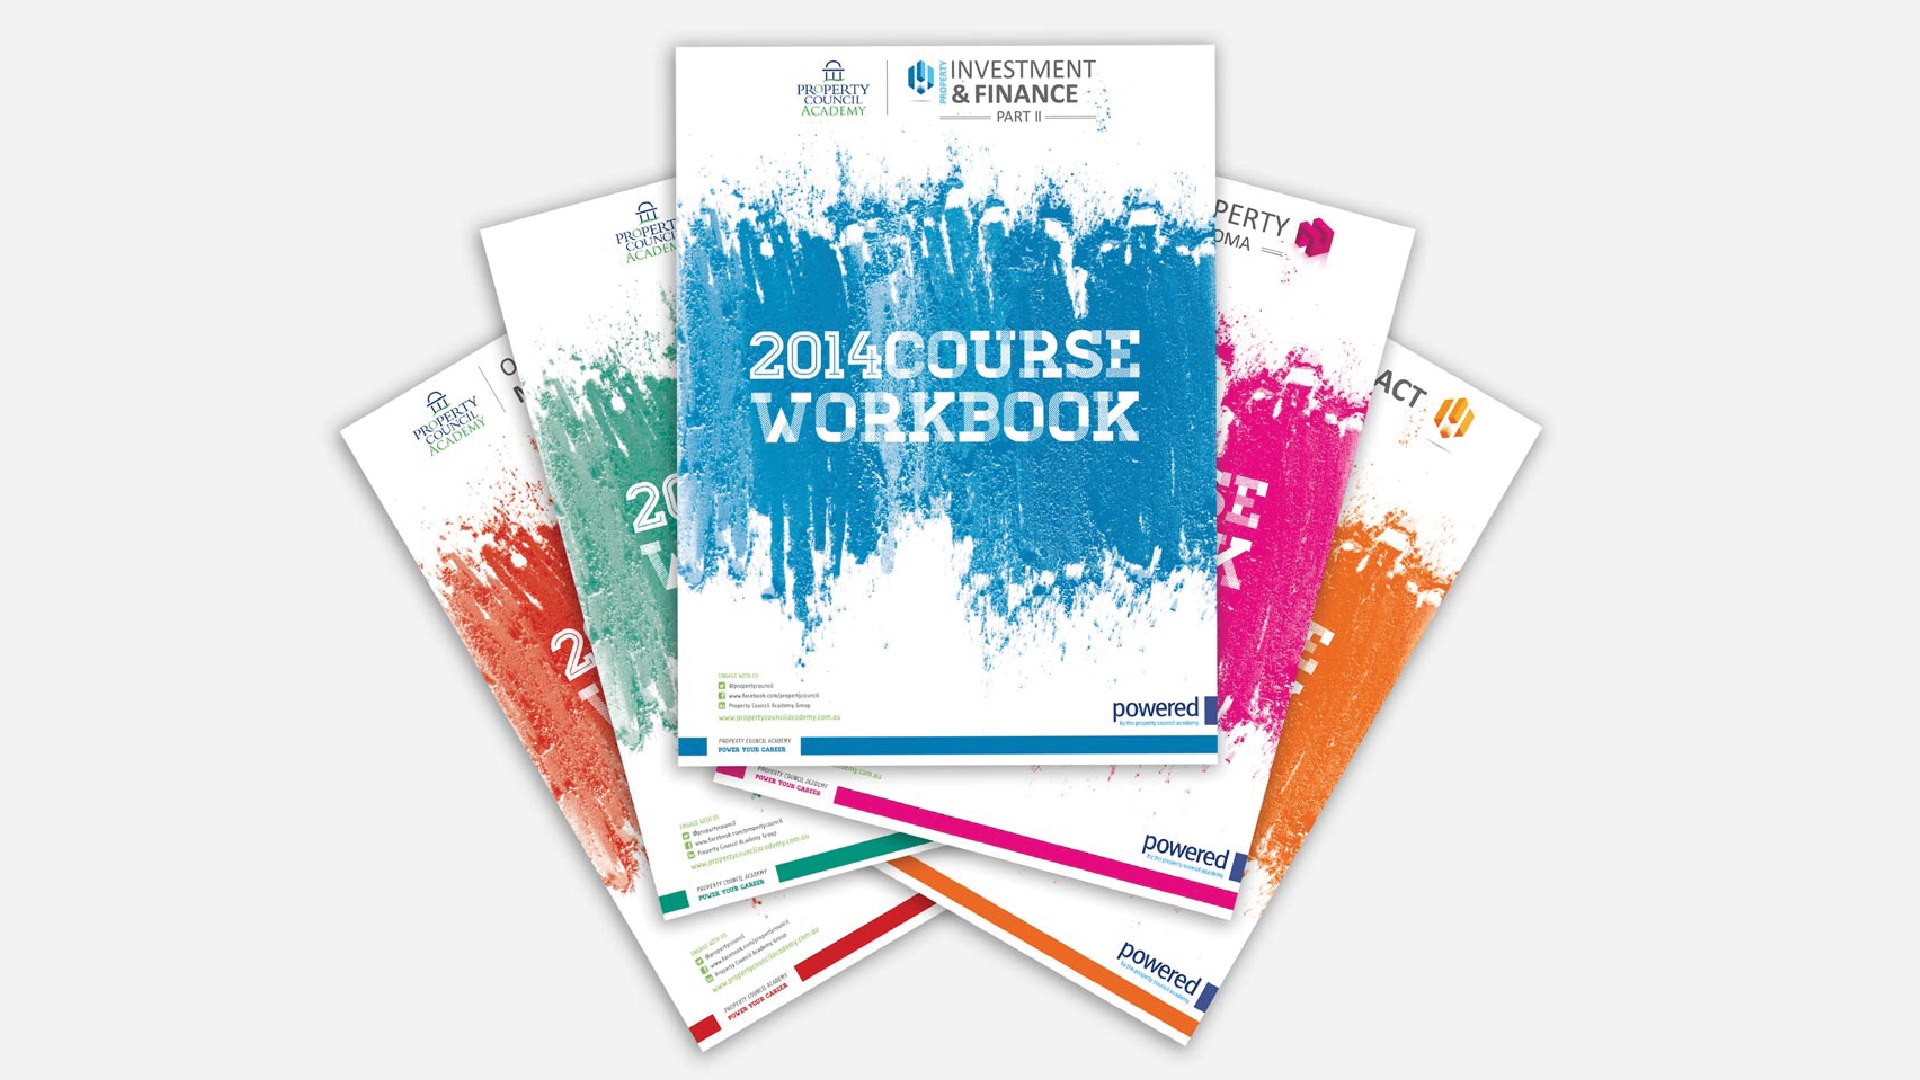 Property Council Academy 2014 Courses Collateral by Think Creative Agency13